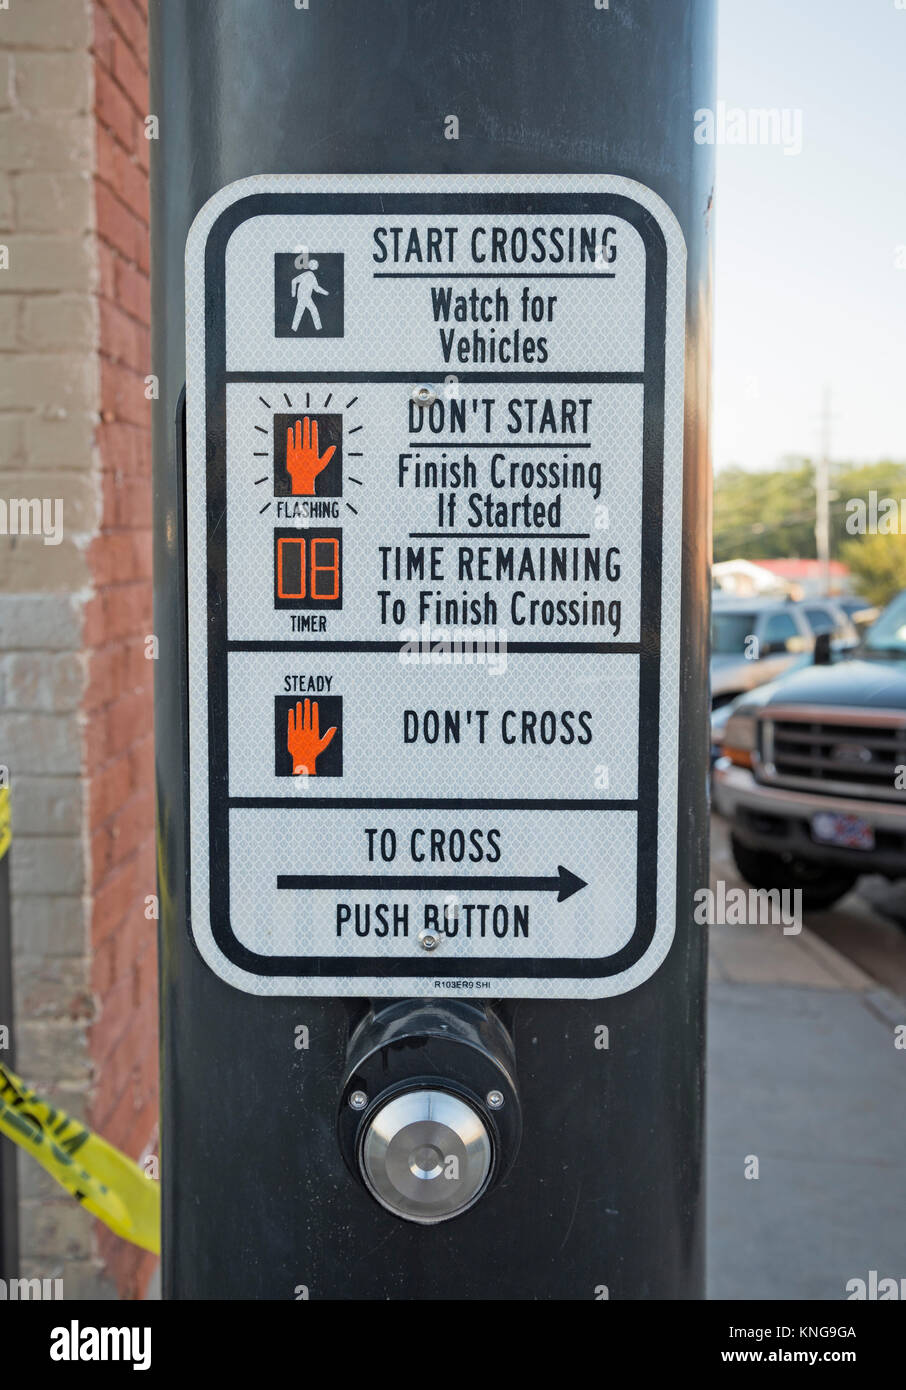 Electronic pushbutton crosswalk safety and assistance in a small Georgia downtown area. Stock Photo